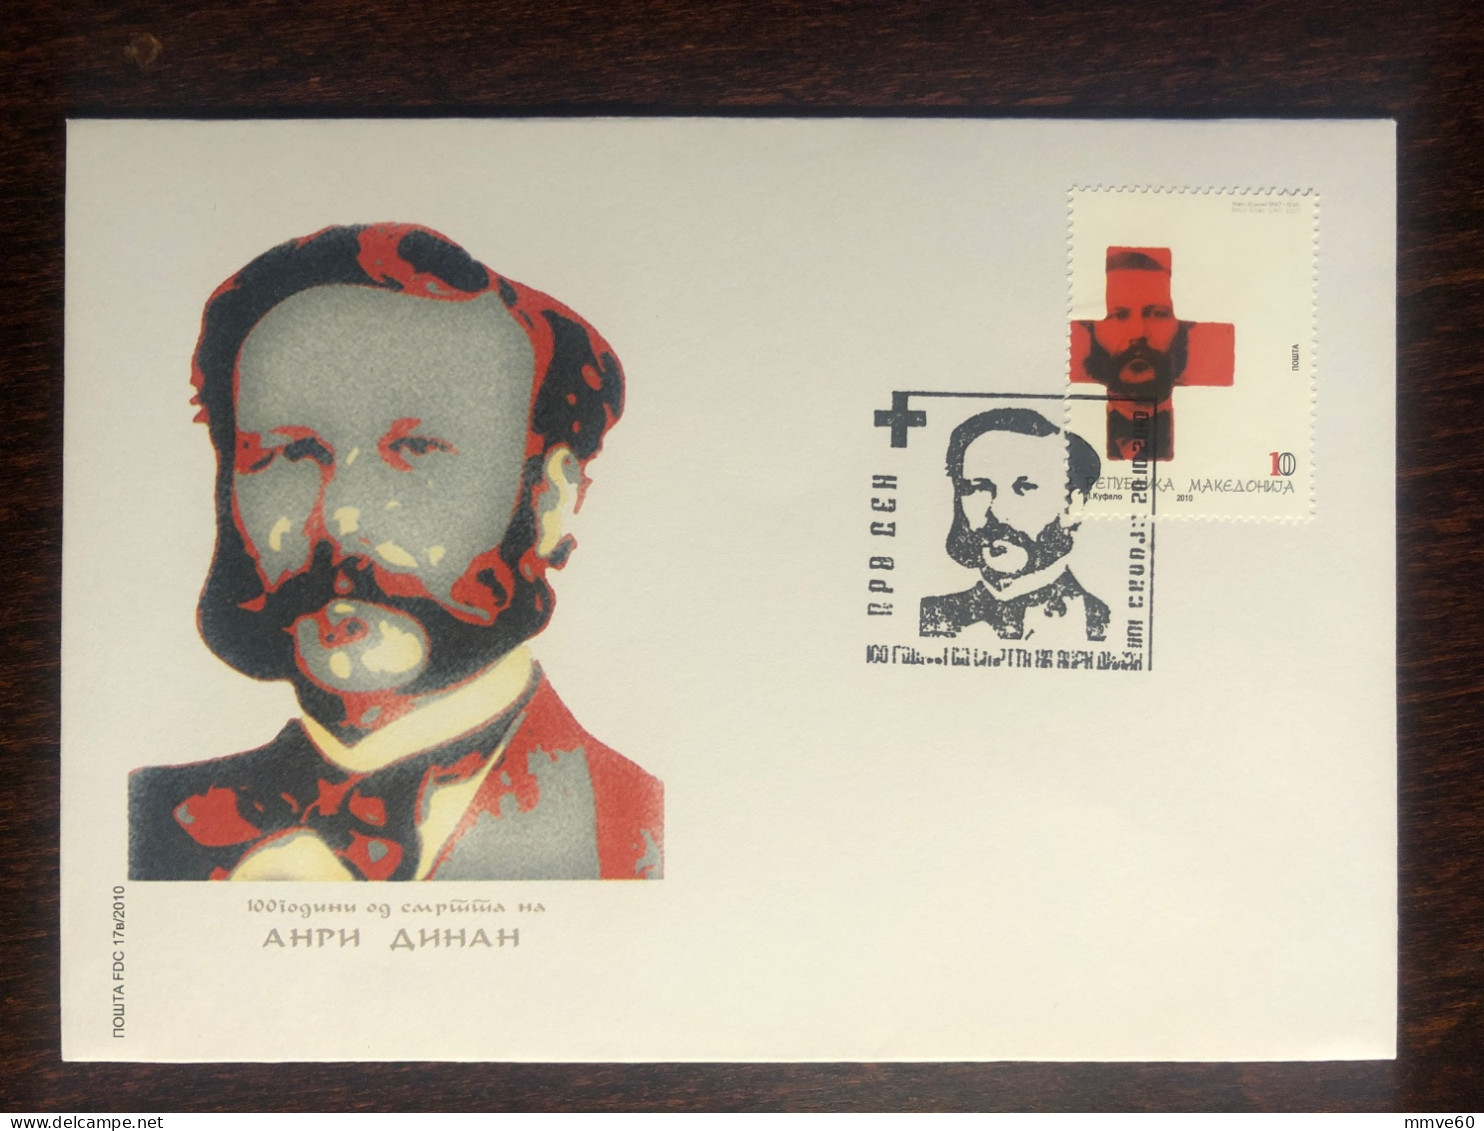 MACEDONIA FDC COVER 2010 YEAR  RED CROSS DUNANT HEALTH MEDICINE STAMPS - Noord-Macedonië